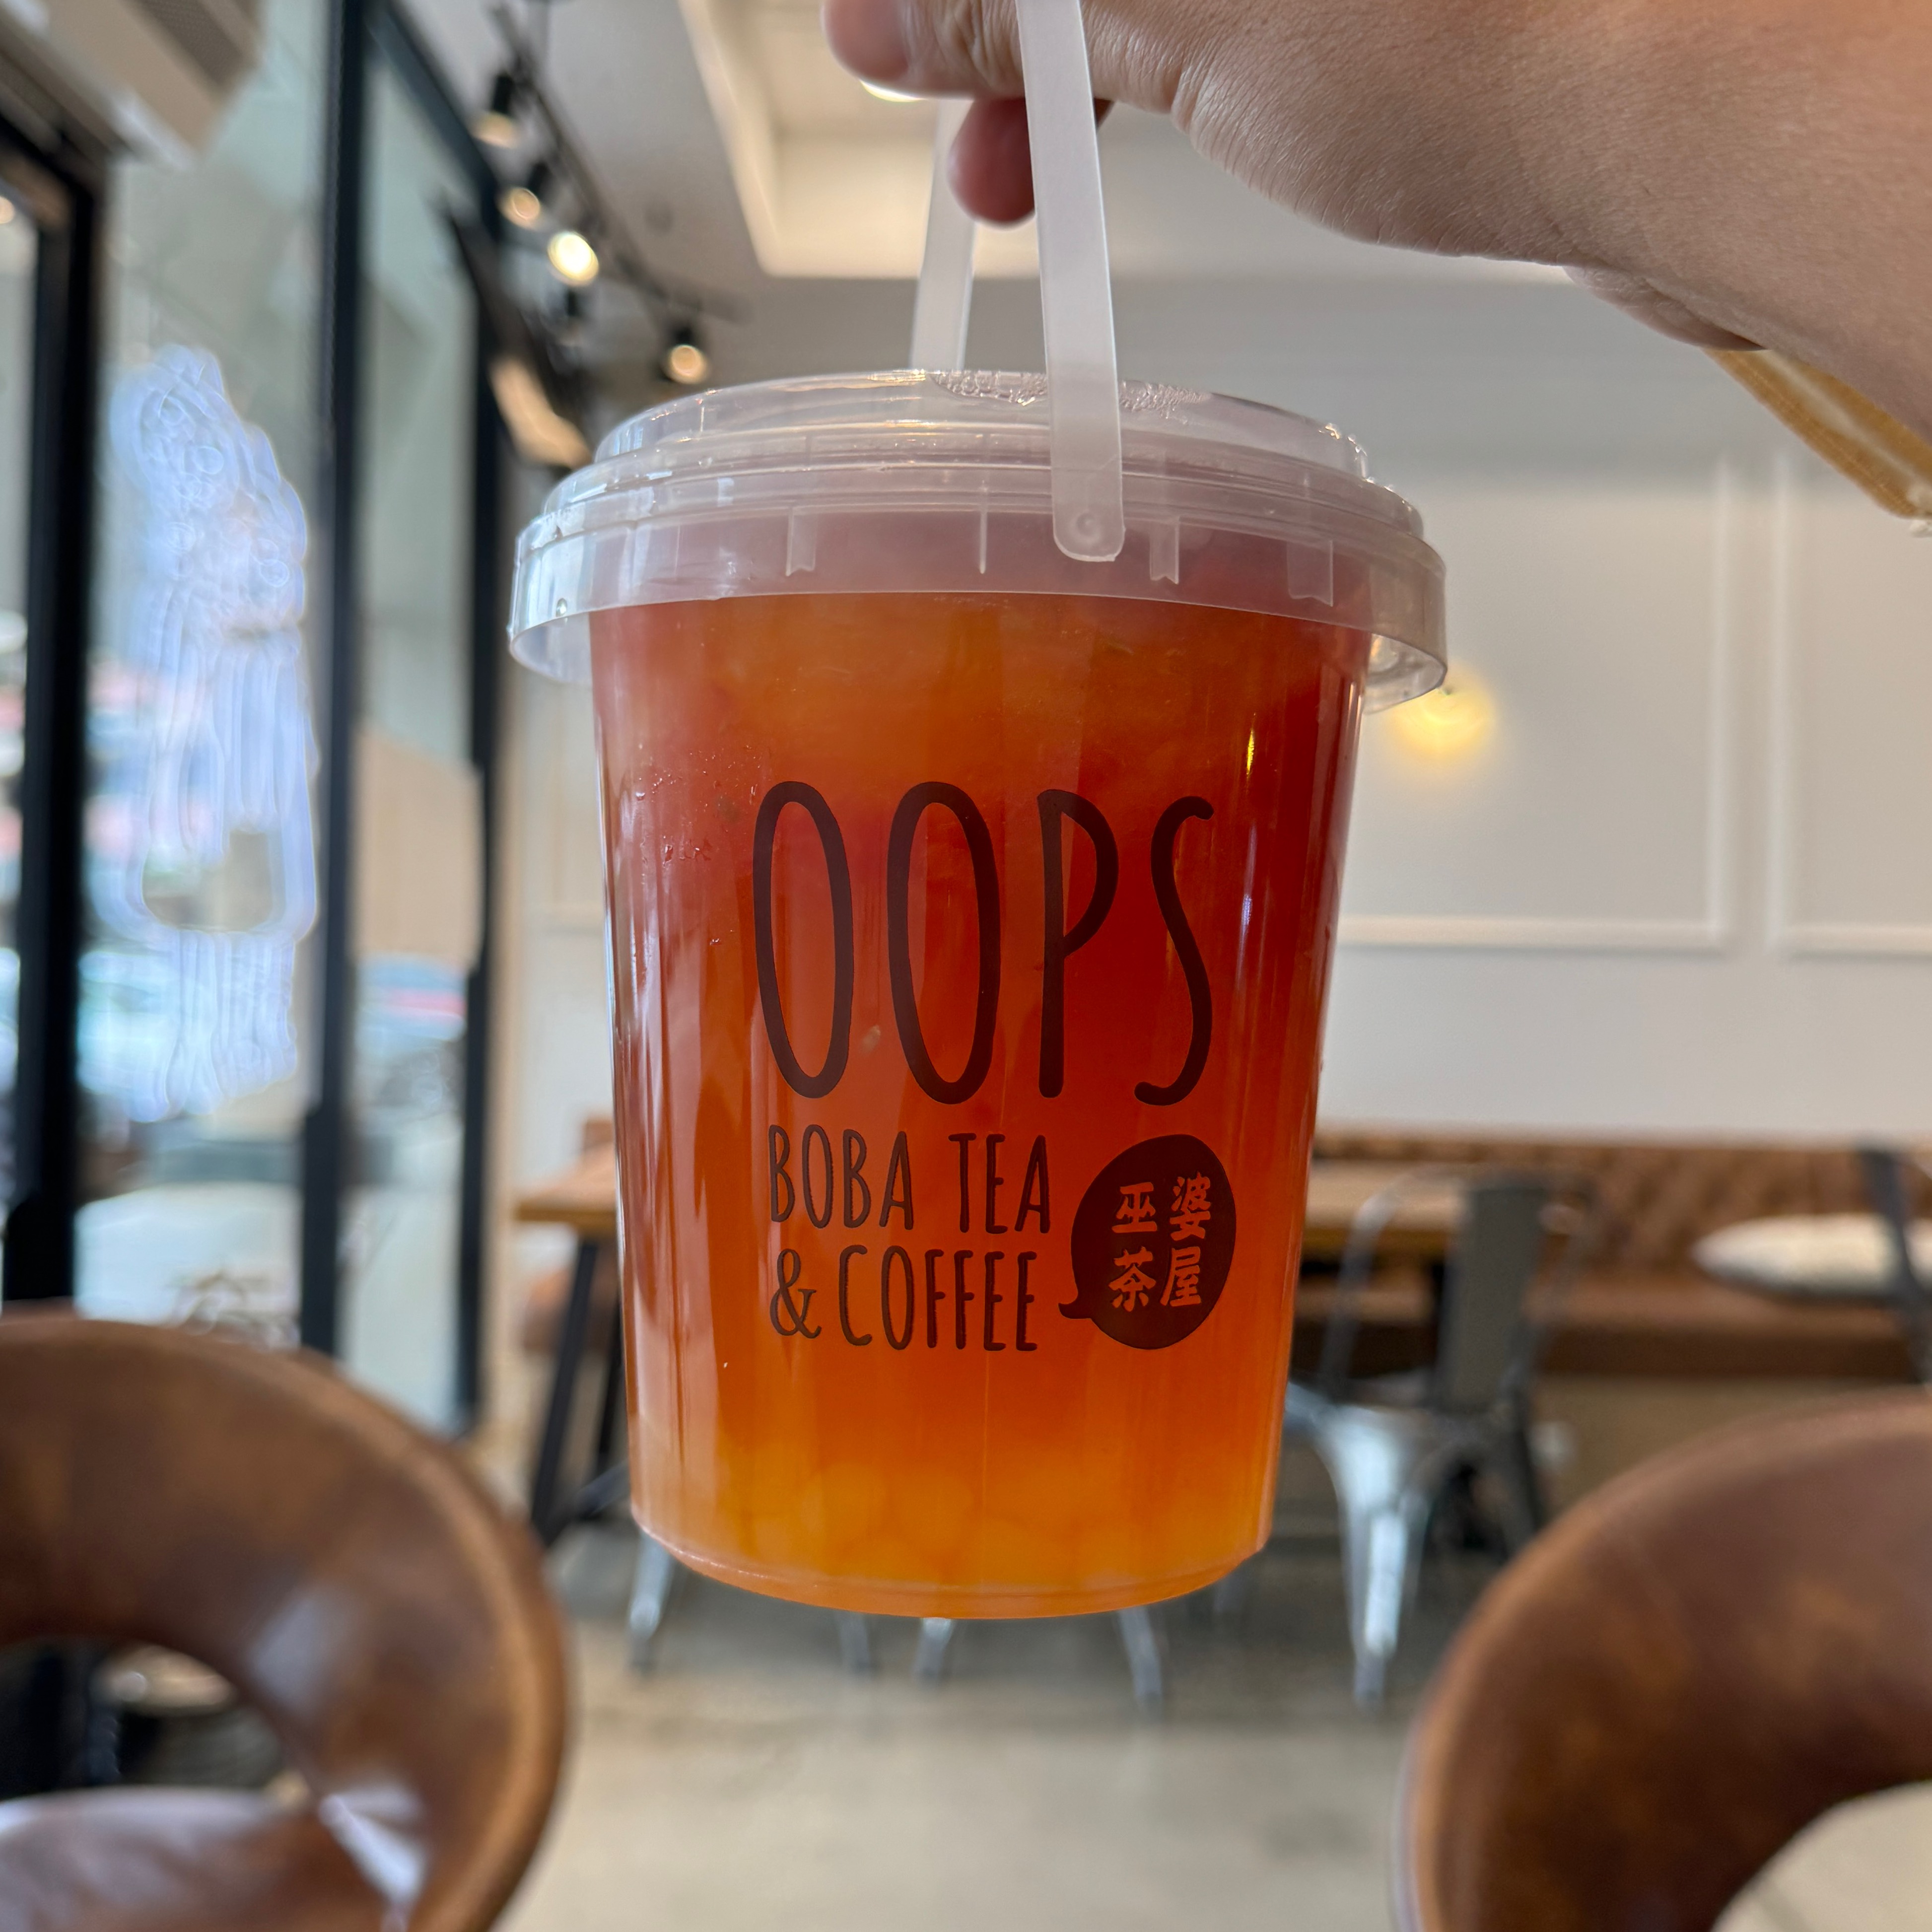 Watermelon Peach Tea $7.30 L at Oops Boba on #foodmento http://foodmento.com/place/13417